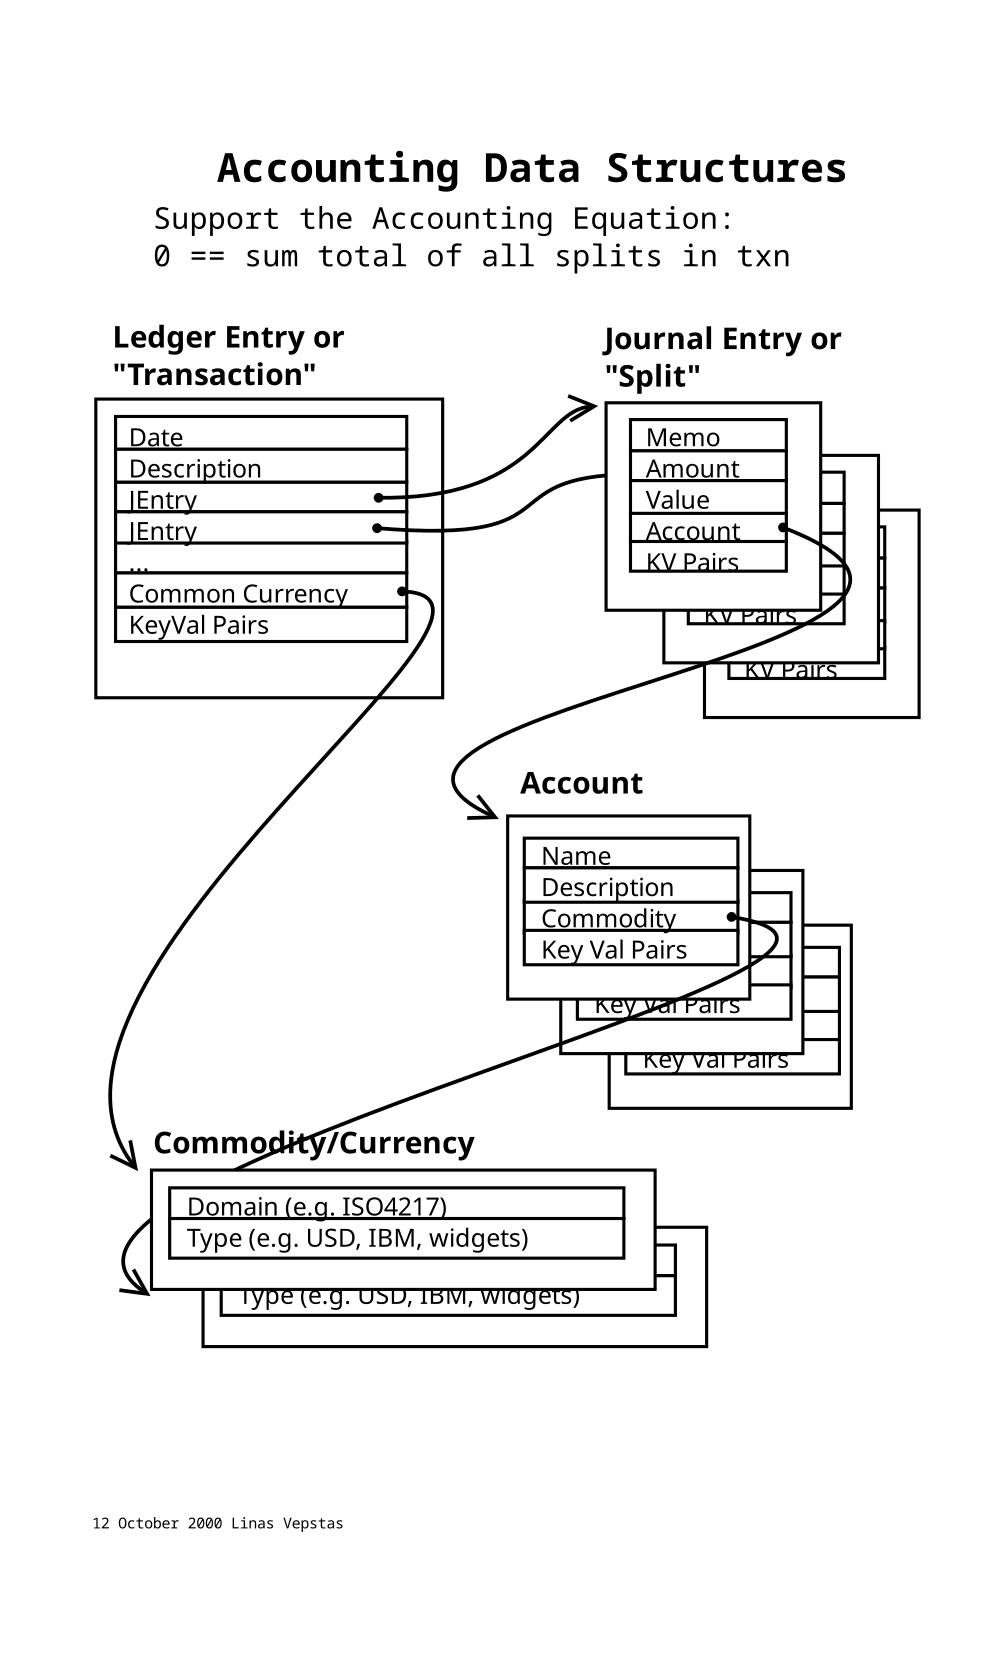 Accounting-data-structures.png